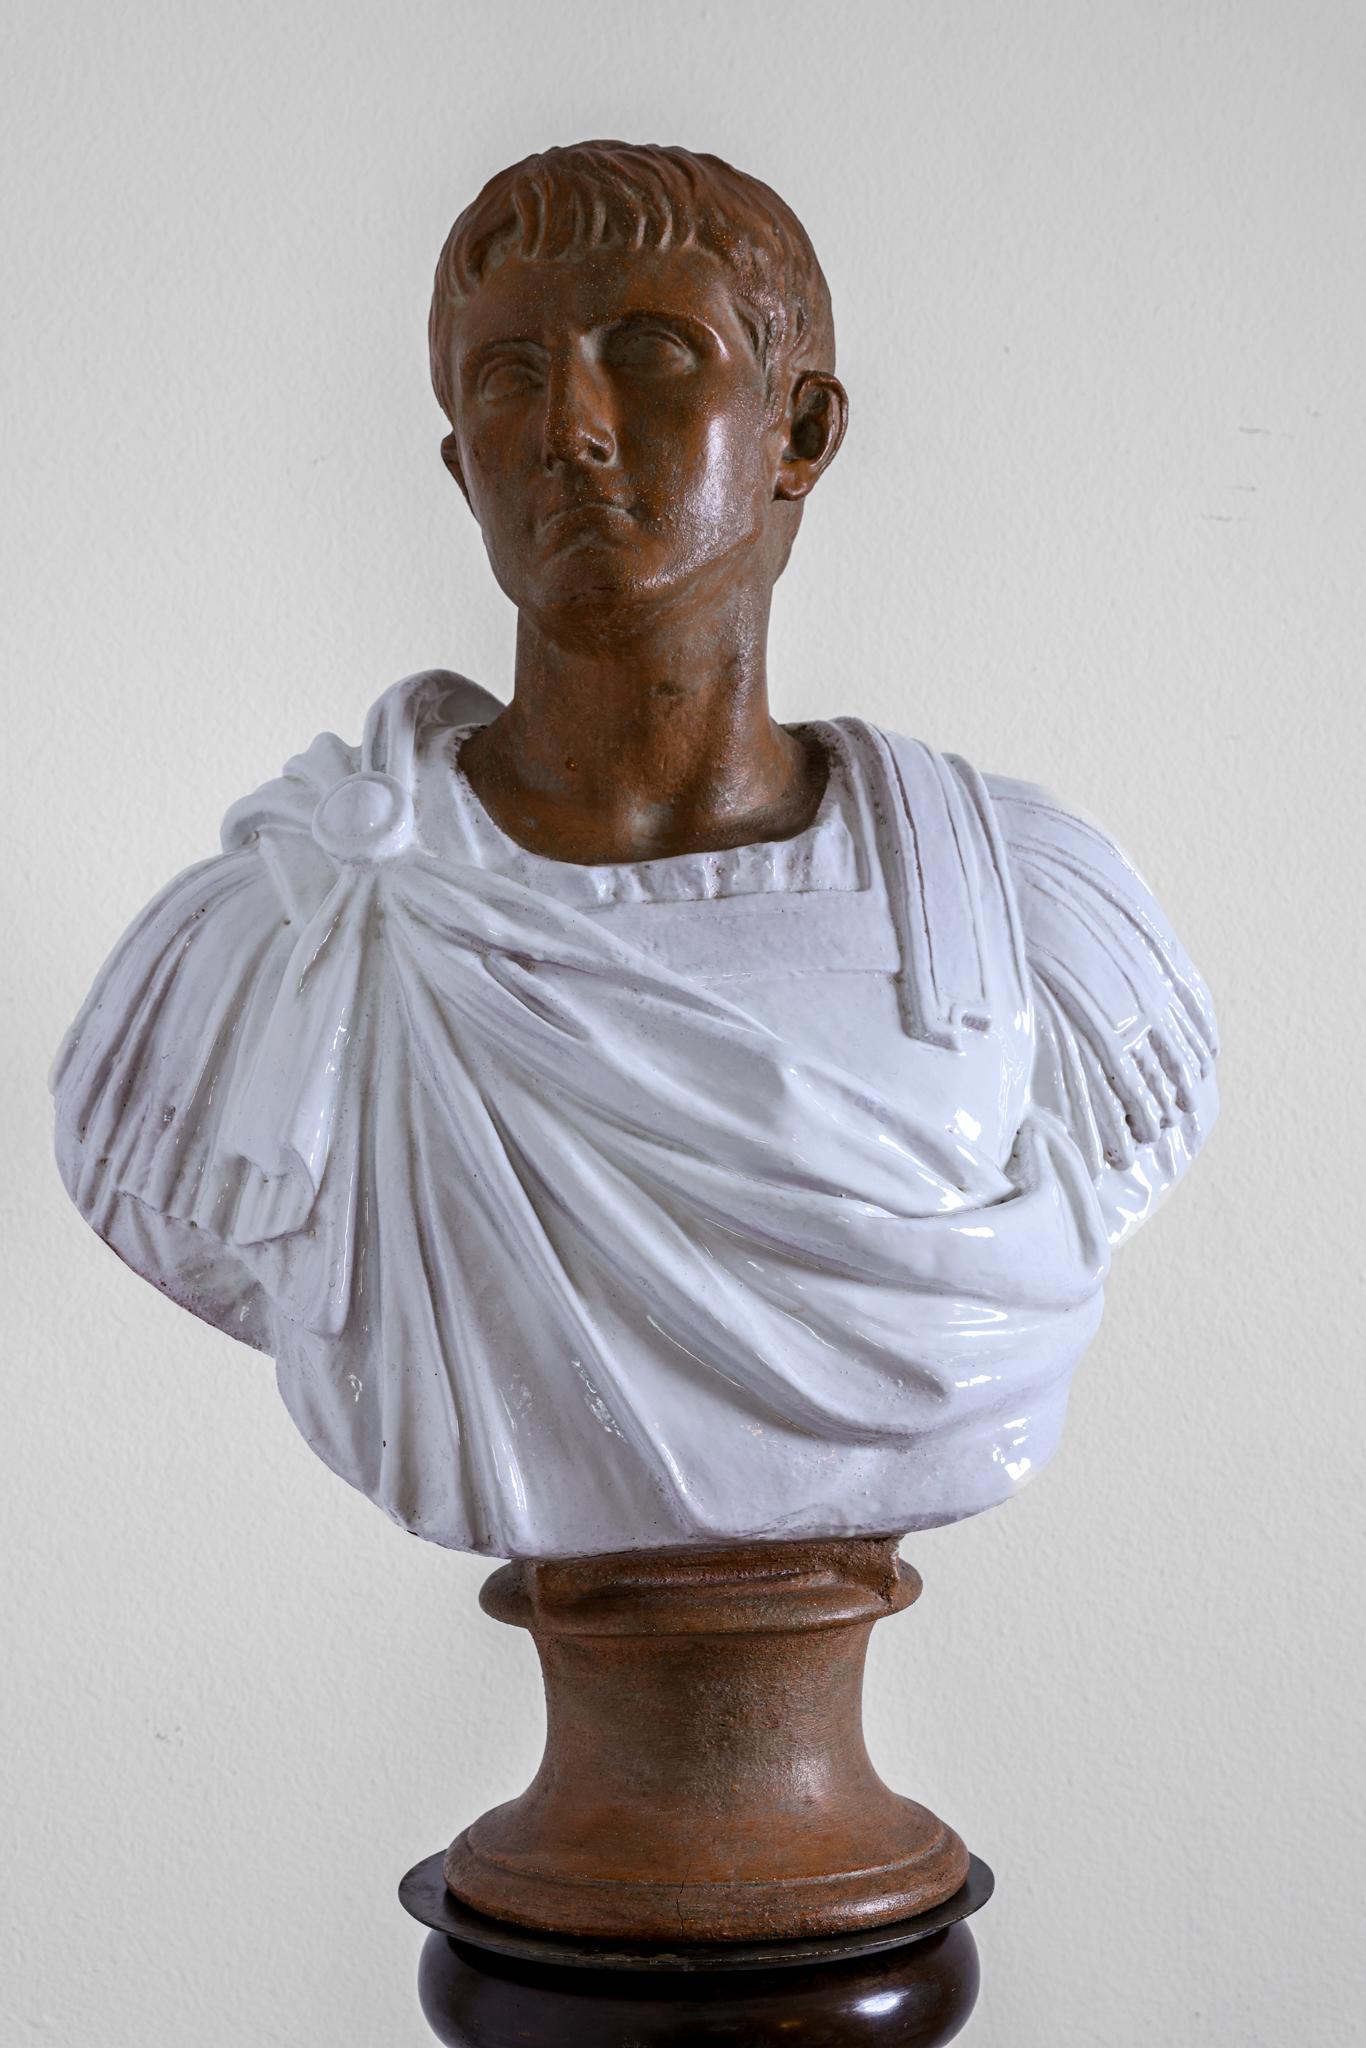 This terracotta sculpture depicts the bust of a Roman Senator or Emperor in armor and a gown. Hi gaze is directed at about a 45 degree angle. This is a magnificently robust life size bust. The garment has been fired in a white glaze. The bust has a